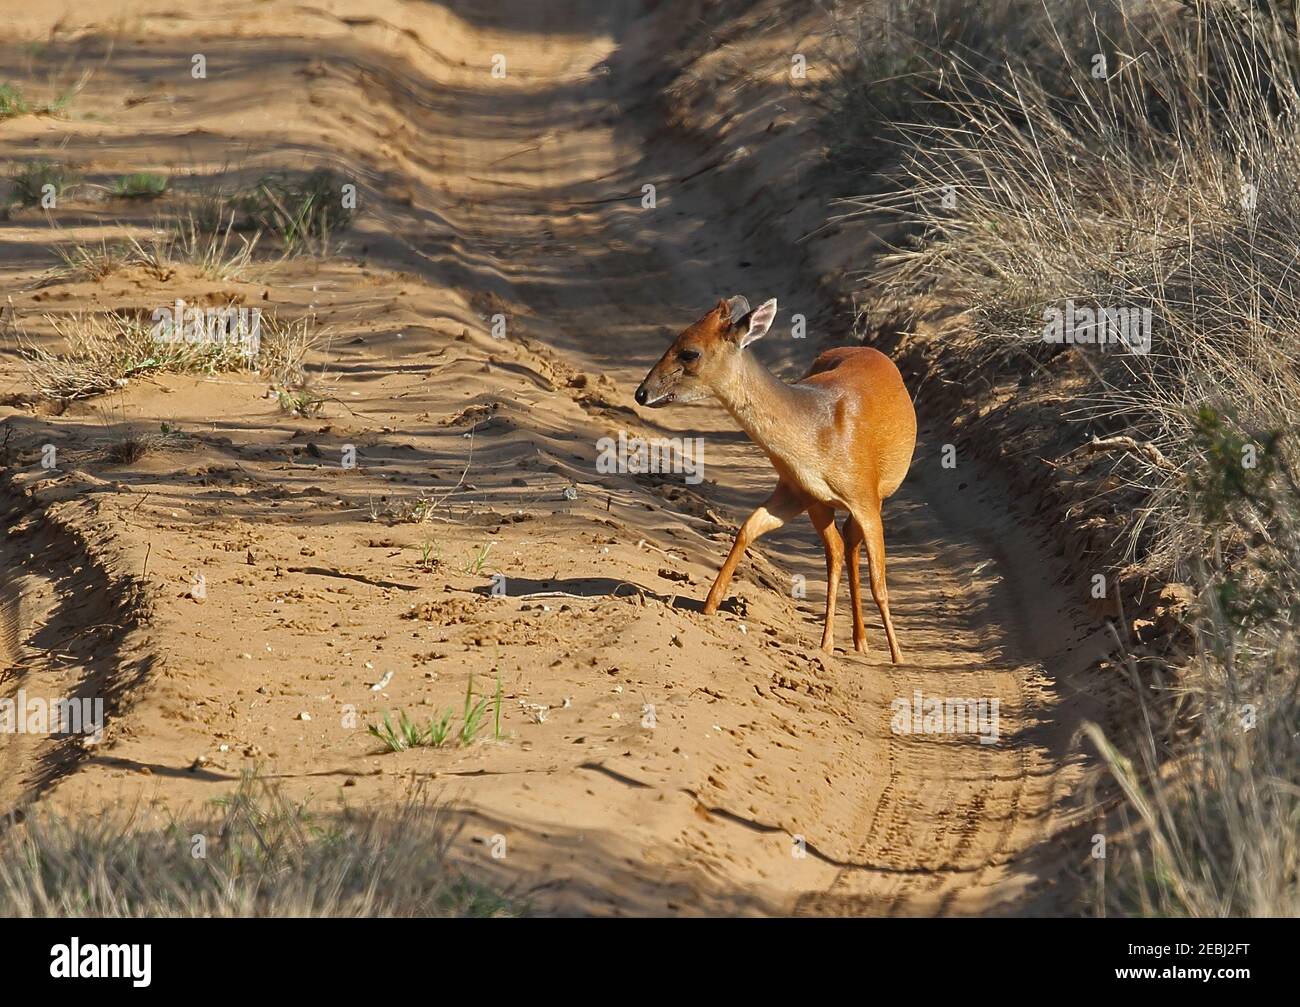 Natal Red Duiker (Cephalophus natalensis) adult standing on sandy track Tembe Elephant Park, South Africa          November Stock Photo